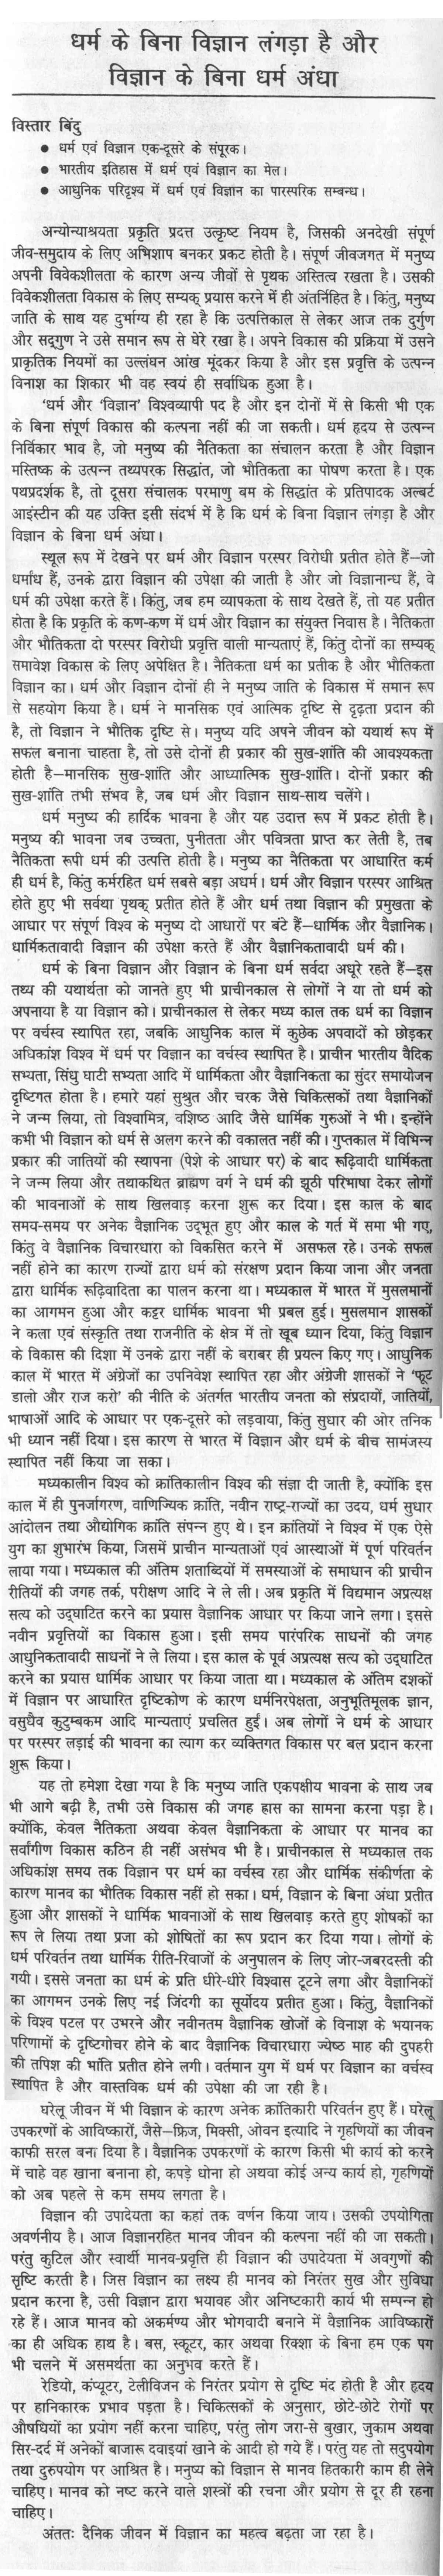 Essay on science in hindi